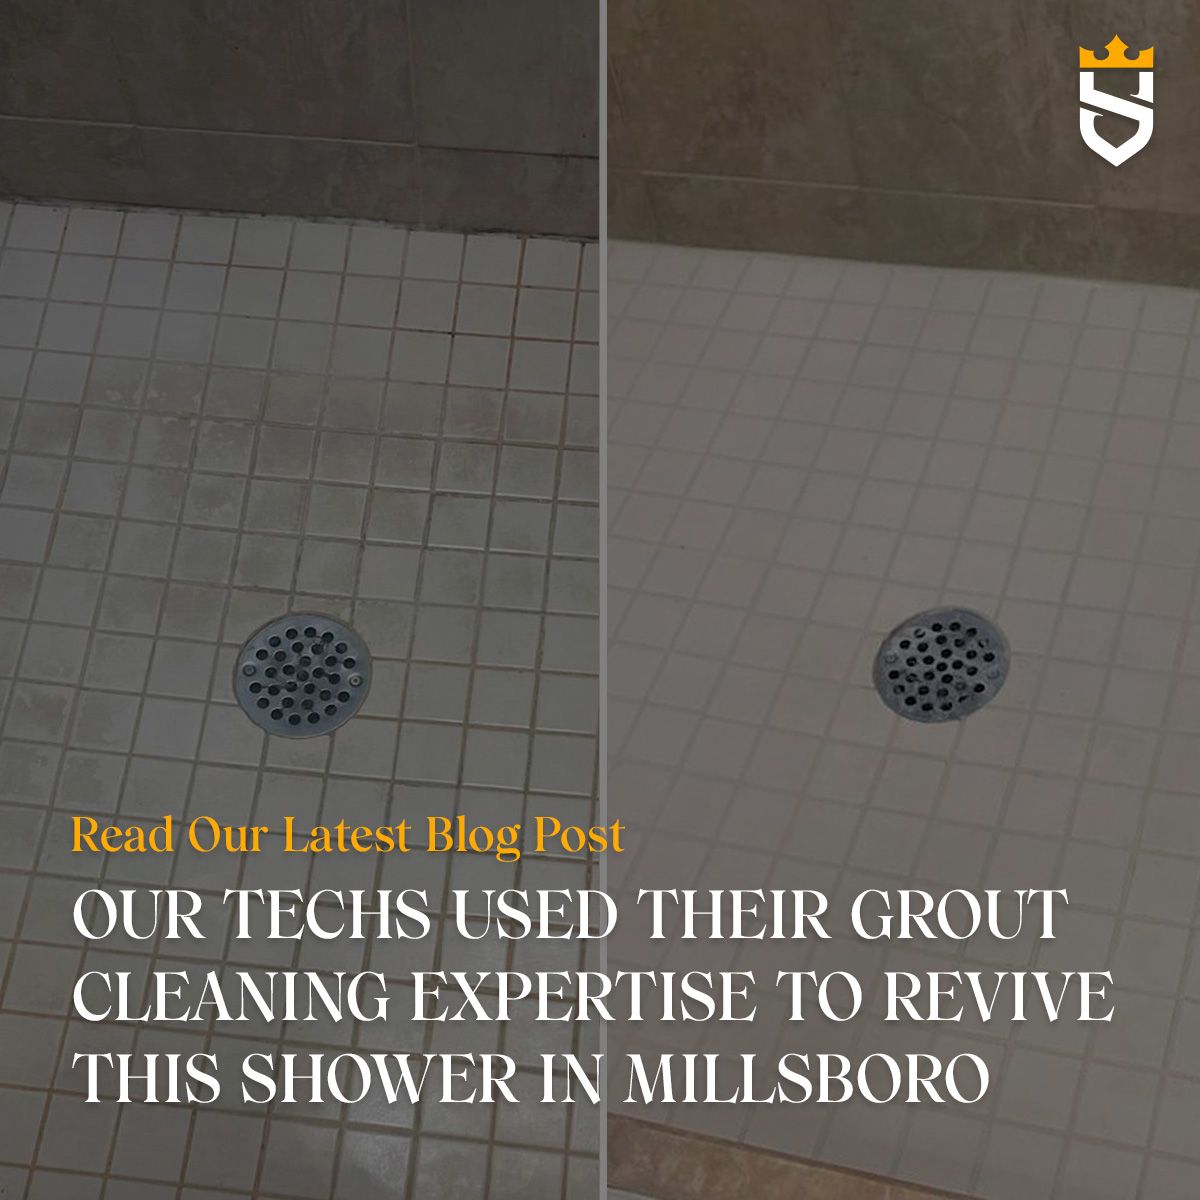 Our Techs Used Their Grout Cleaning Expertise to Revive This Shower in Millsboro